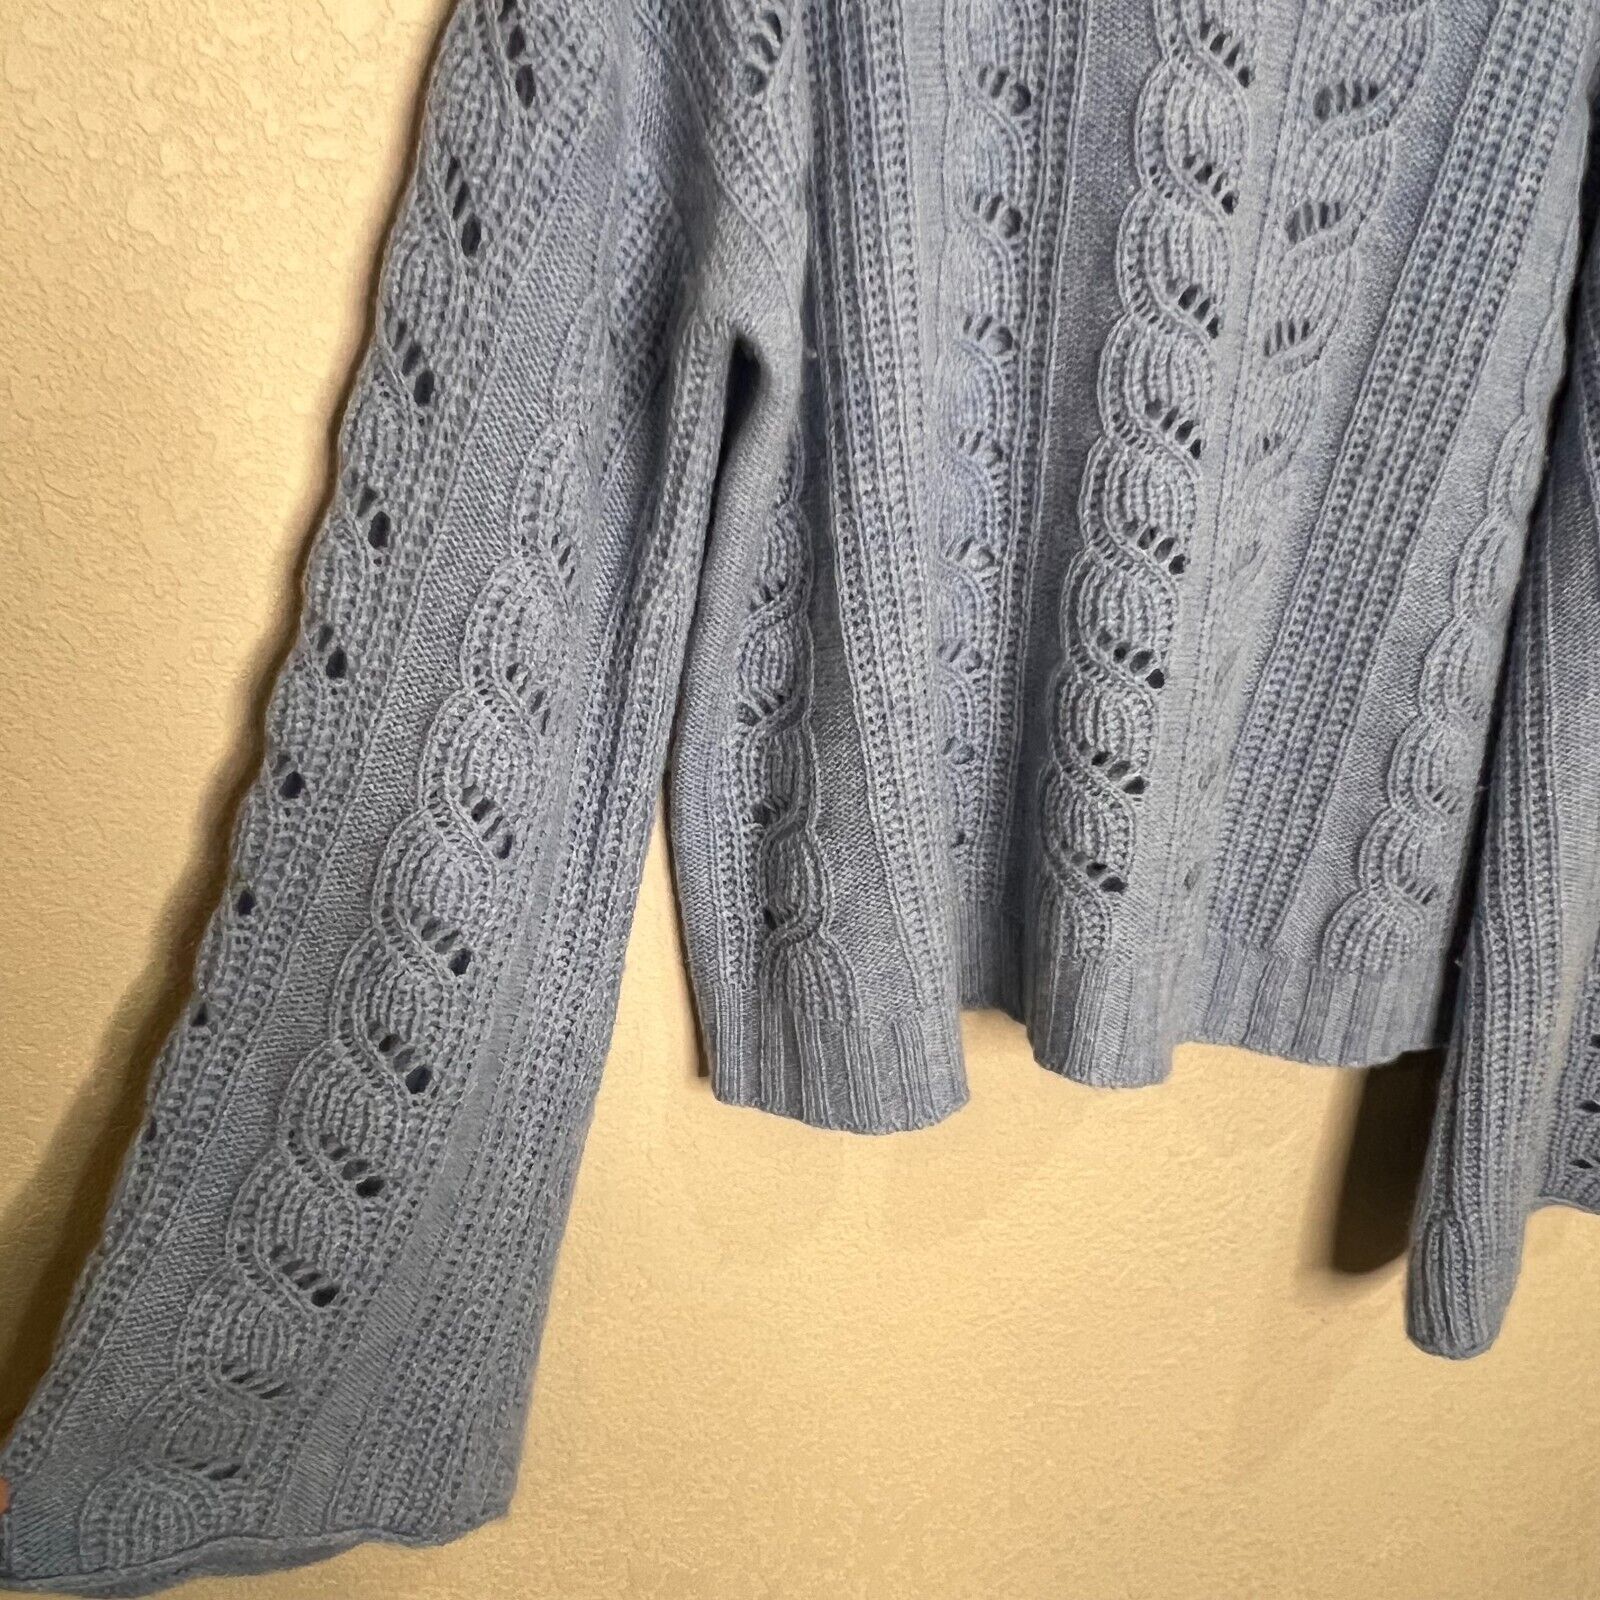 Bloomingdales AQUA Blue Cashmere Long Sleeve Crew Neck Pullover Sweater Size Med